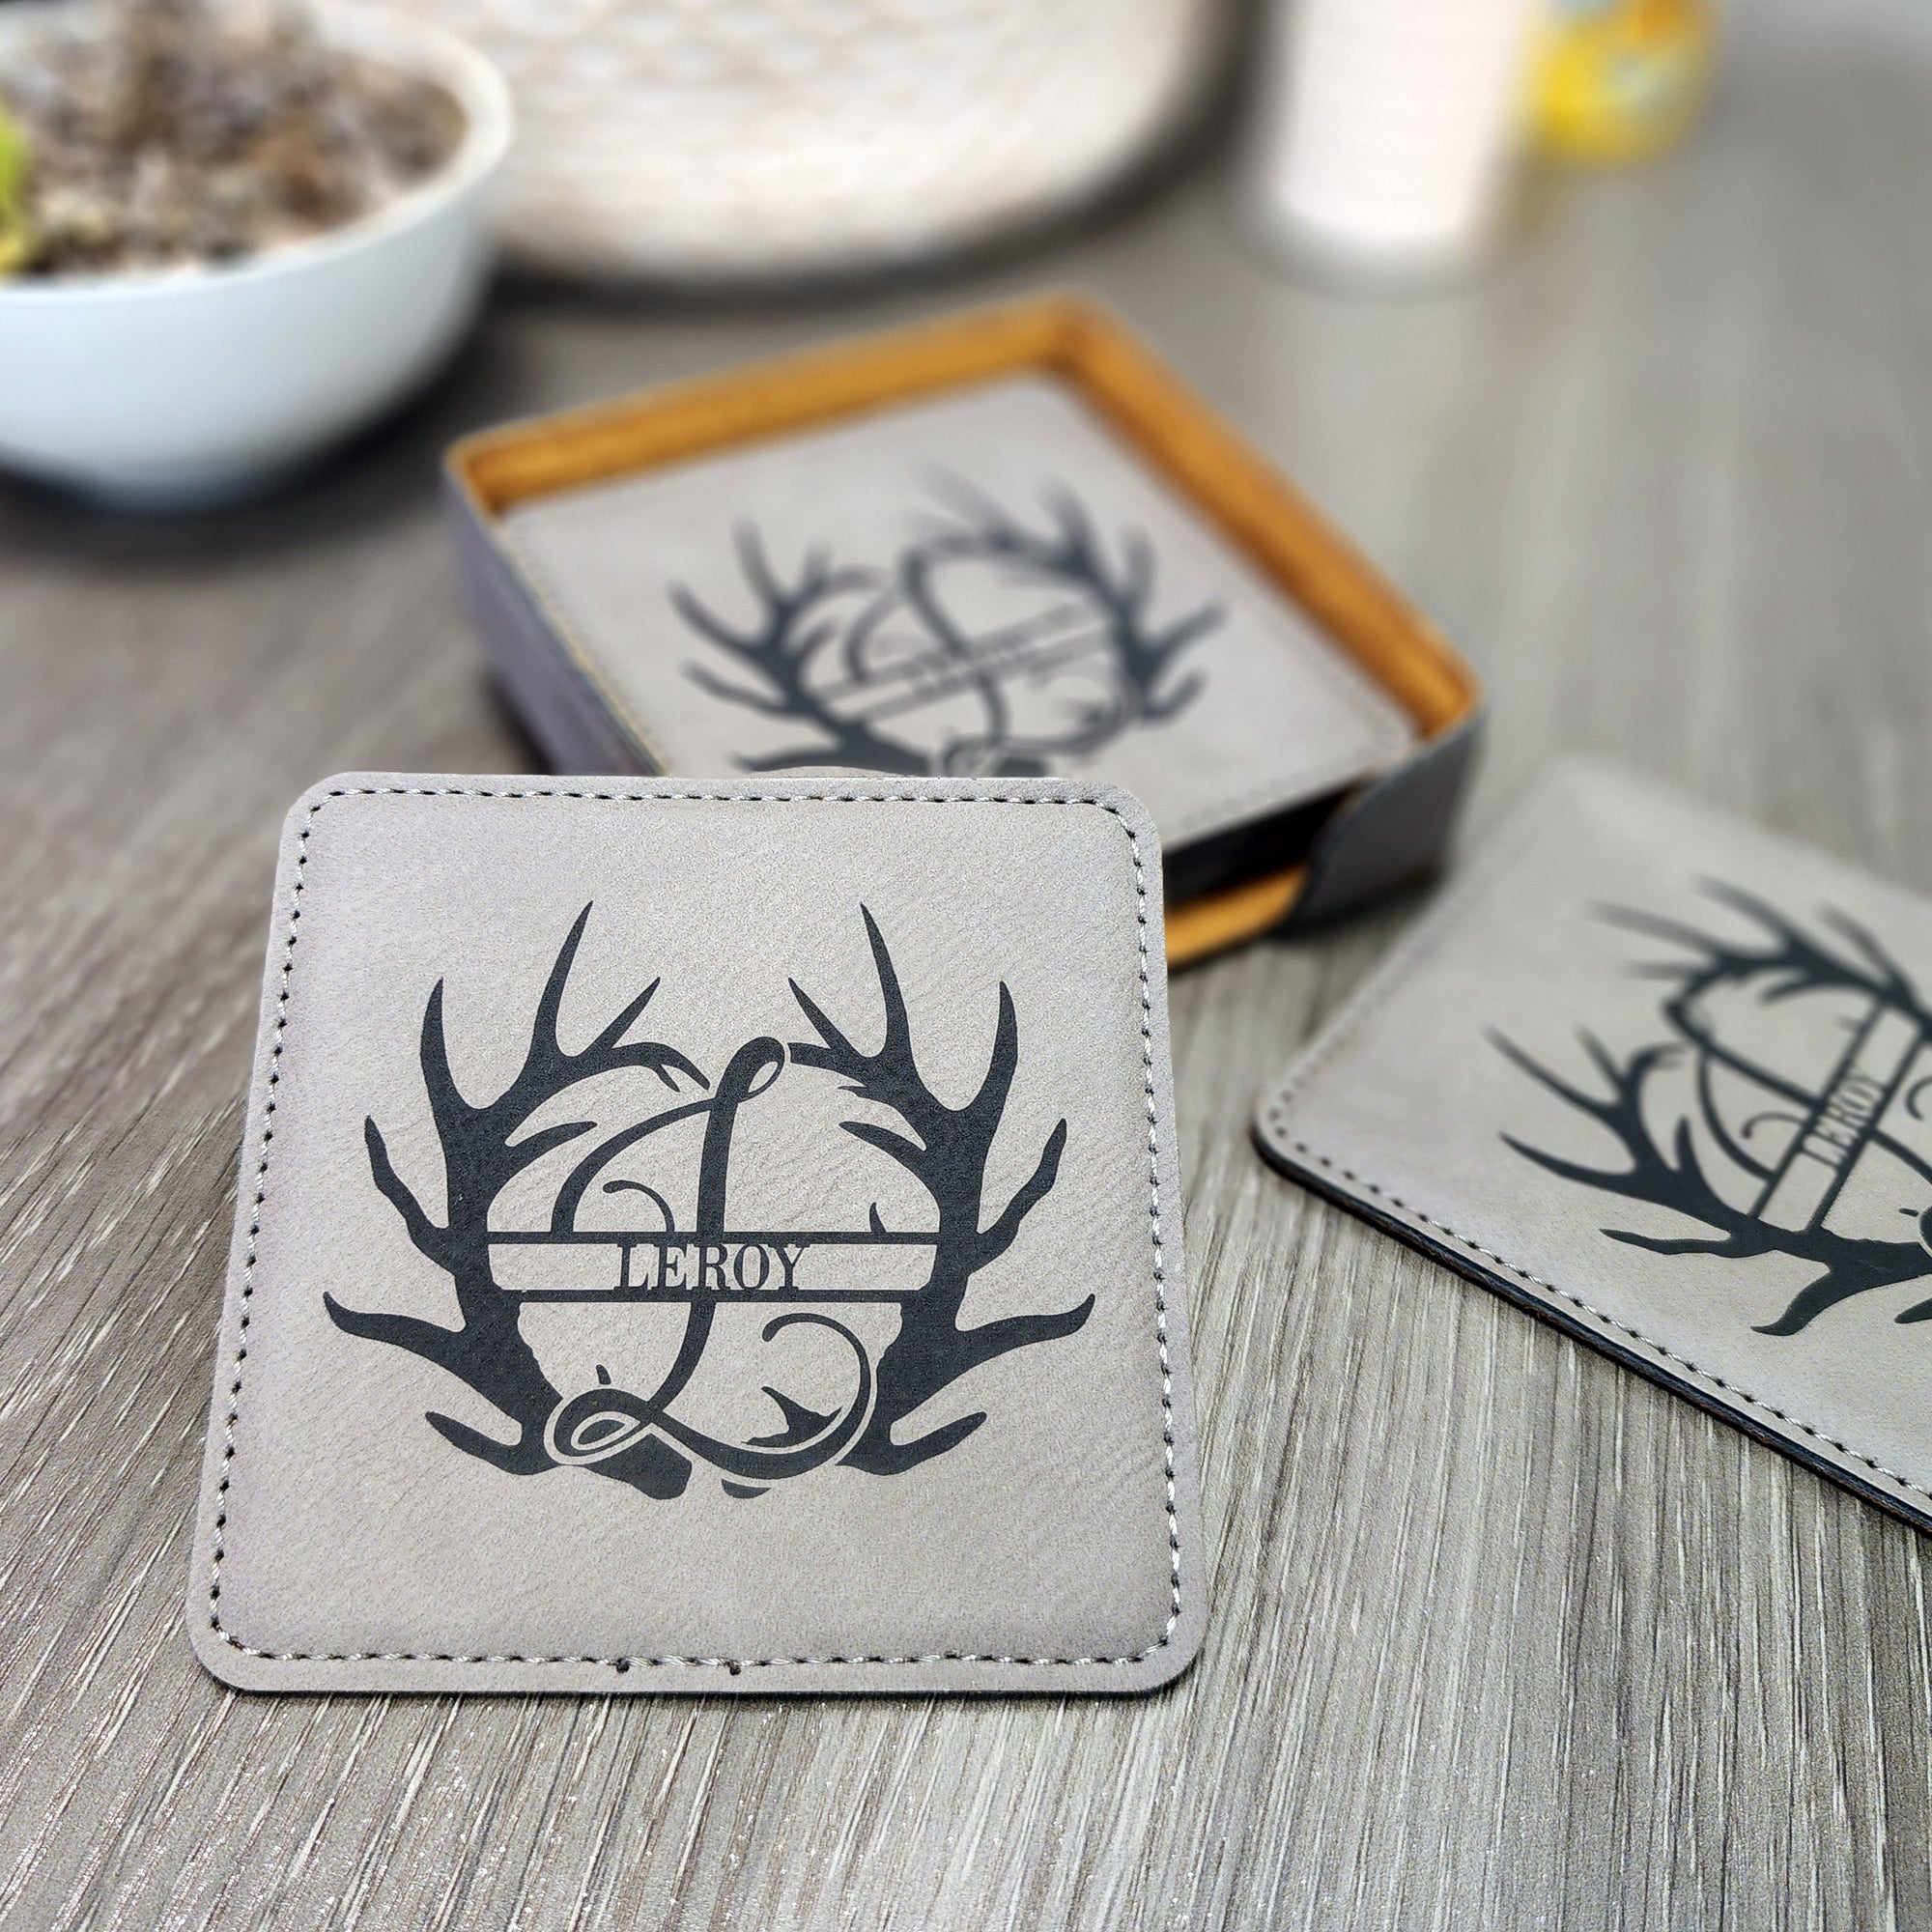 Square Leather Coaster with Antler Last Name Initial Monogram - Set of 6